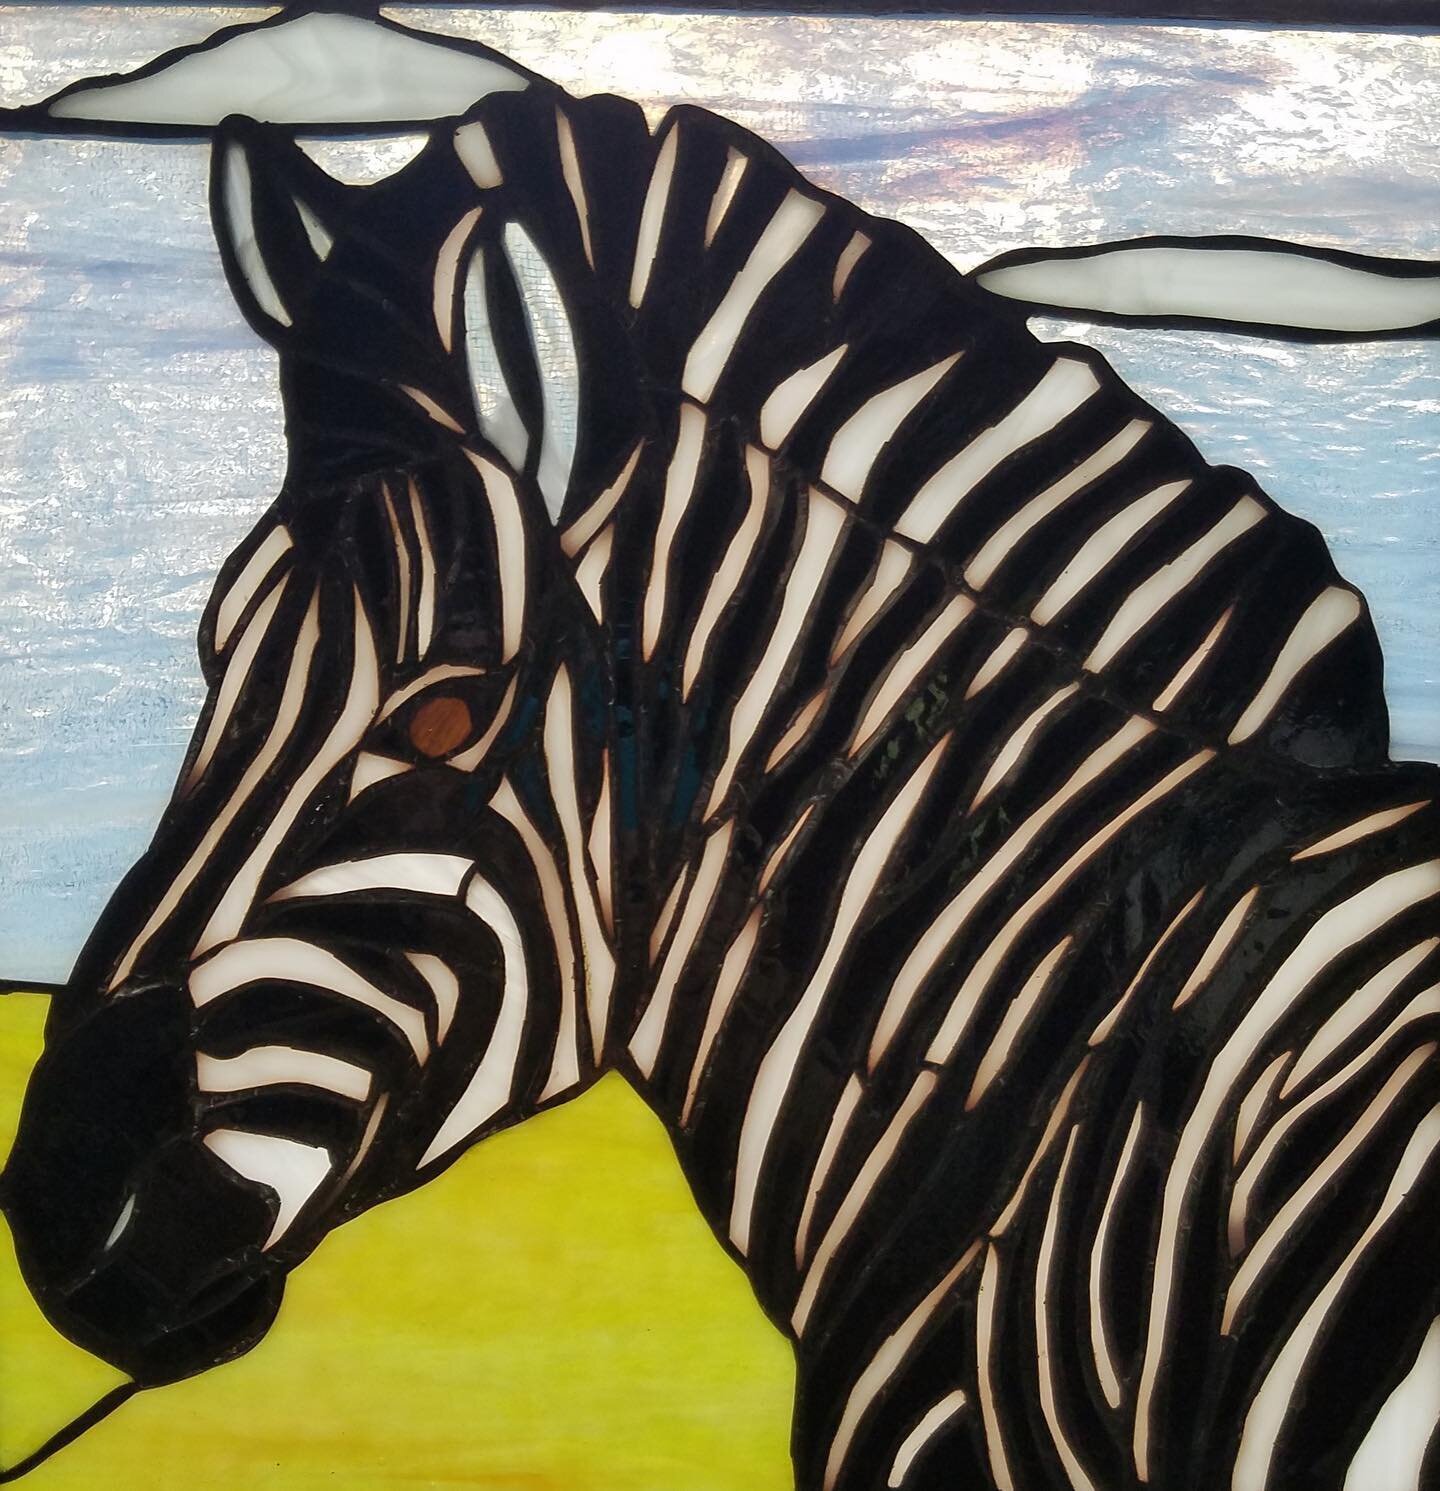 Member and glass artist Meg Zellinger
created this stained glass panel based on a zebra she photographed while in Botswana. Meg points out that stained glass looks different as the light changes. When viewed at night, she says, light from the room ch